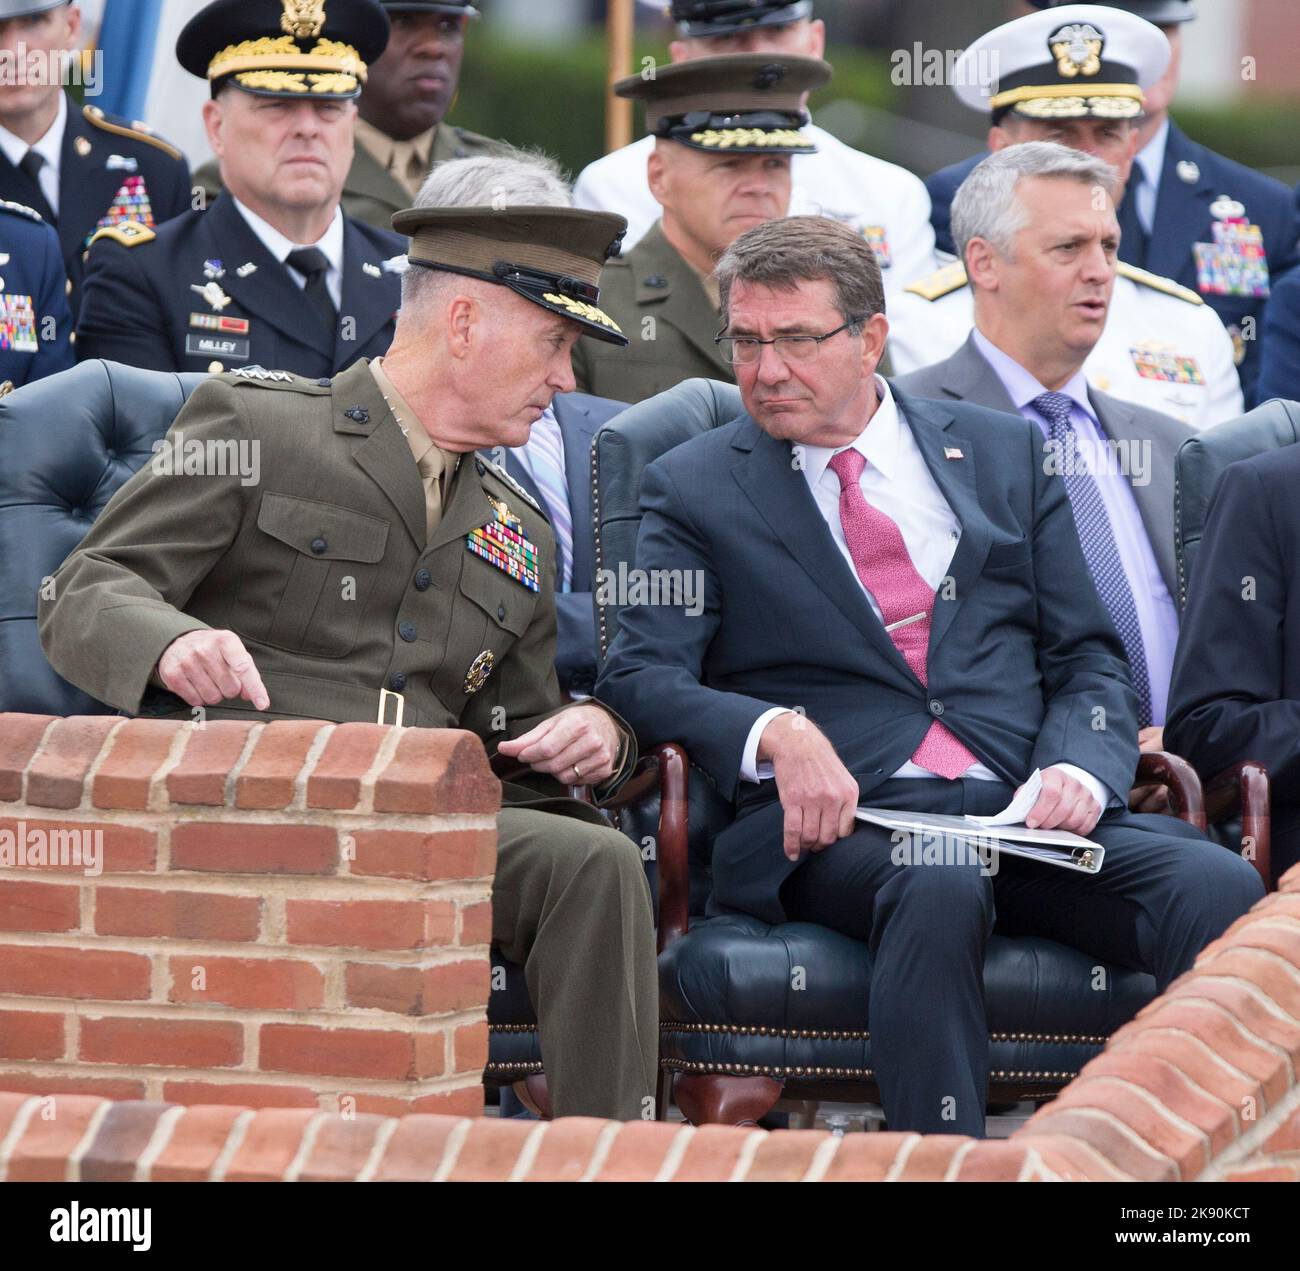 Arlington, United States Of America. 25th Sep, 2015. General Joseph Dunford speaks with Secretary of Defense Ashton Carter during the retirement ceremony of General Martin Dempsey at Fort Myer, Virginia, September 25, 2015. Credit: Chris Kleponis/CNP/Sipa USA Credit: Sipa USA/Alamy Live News Stock Photo